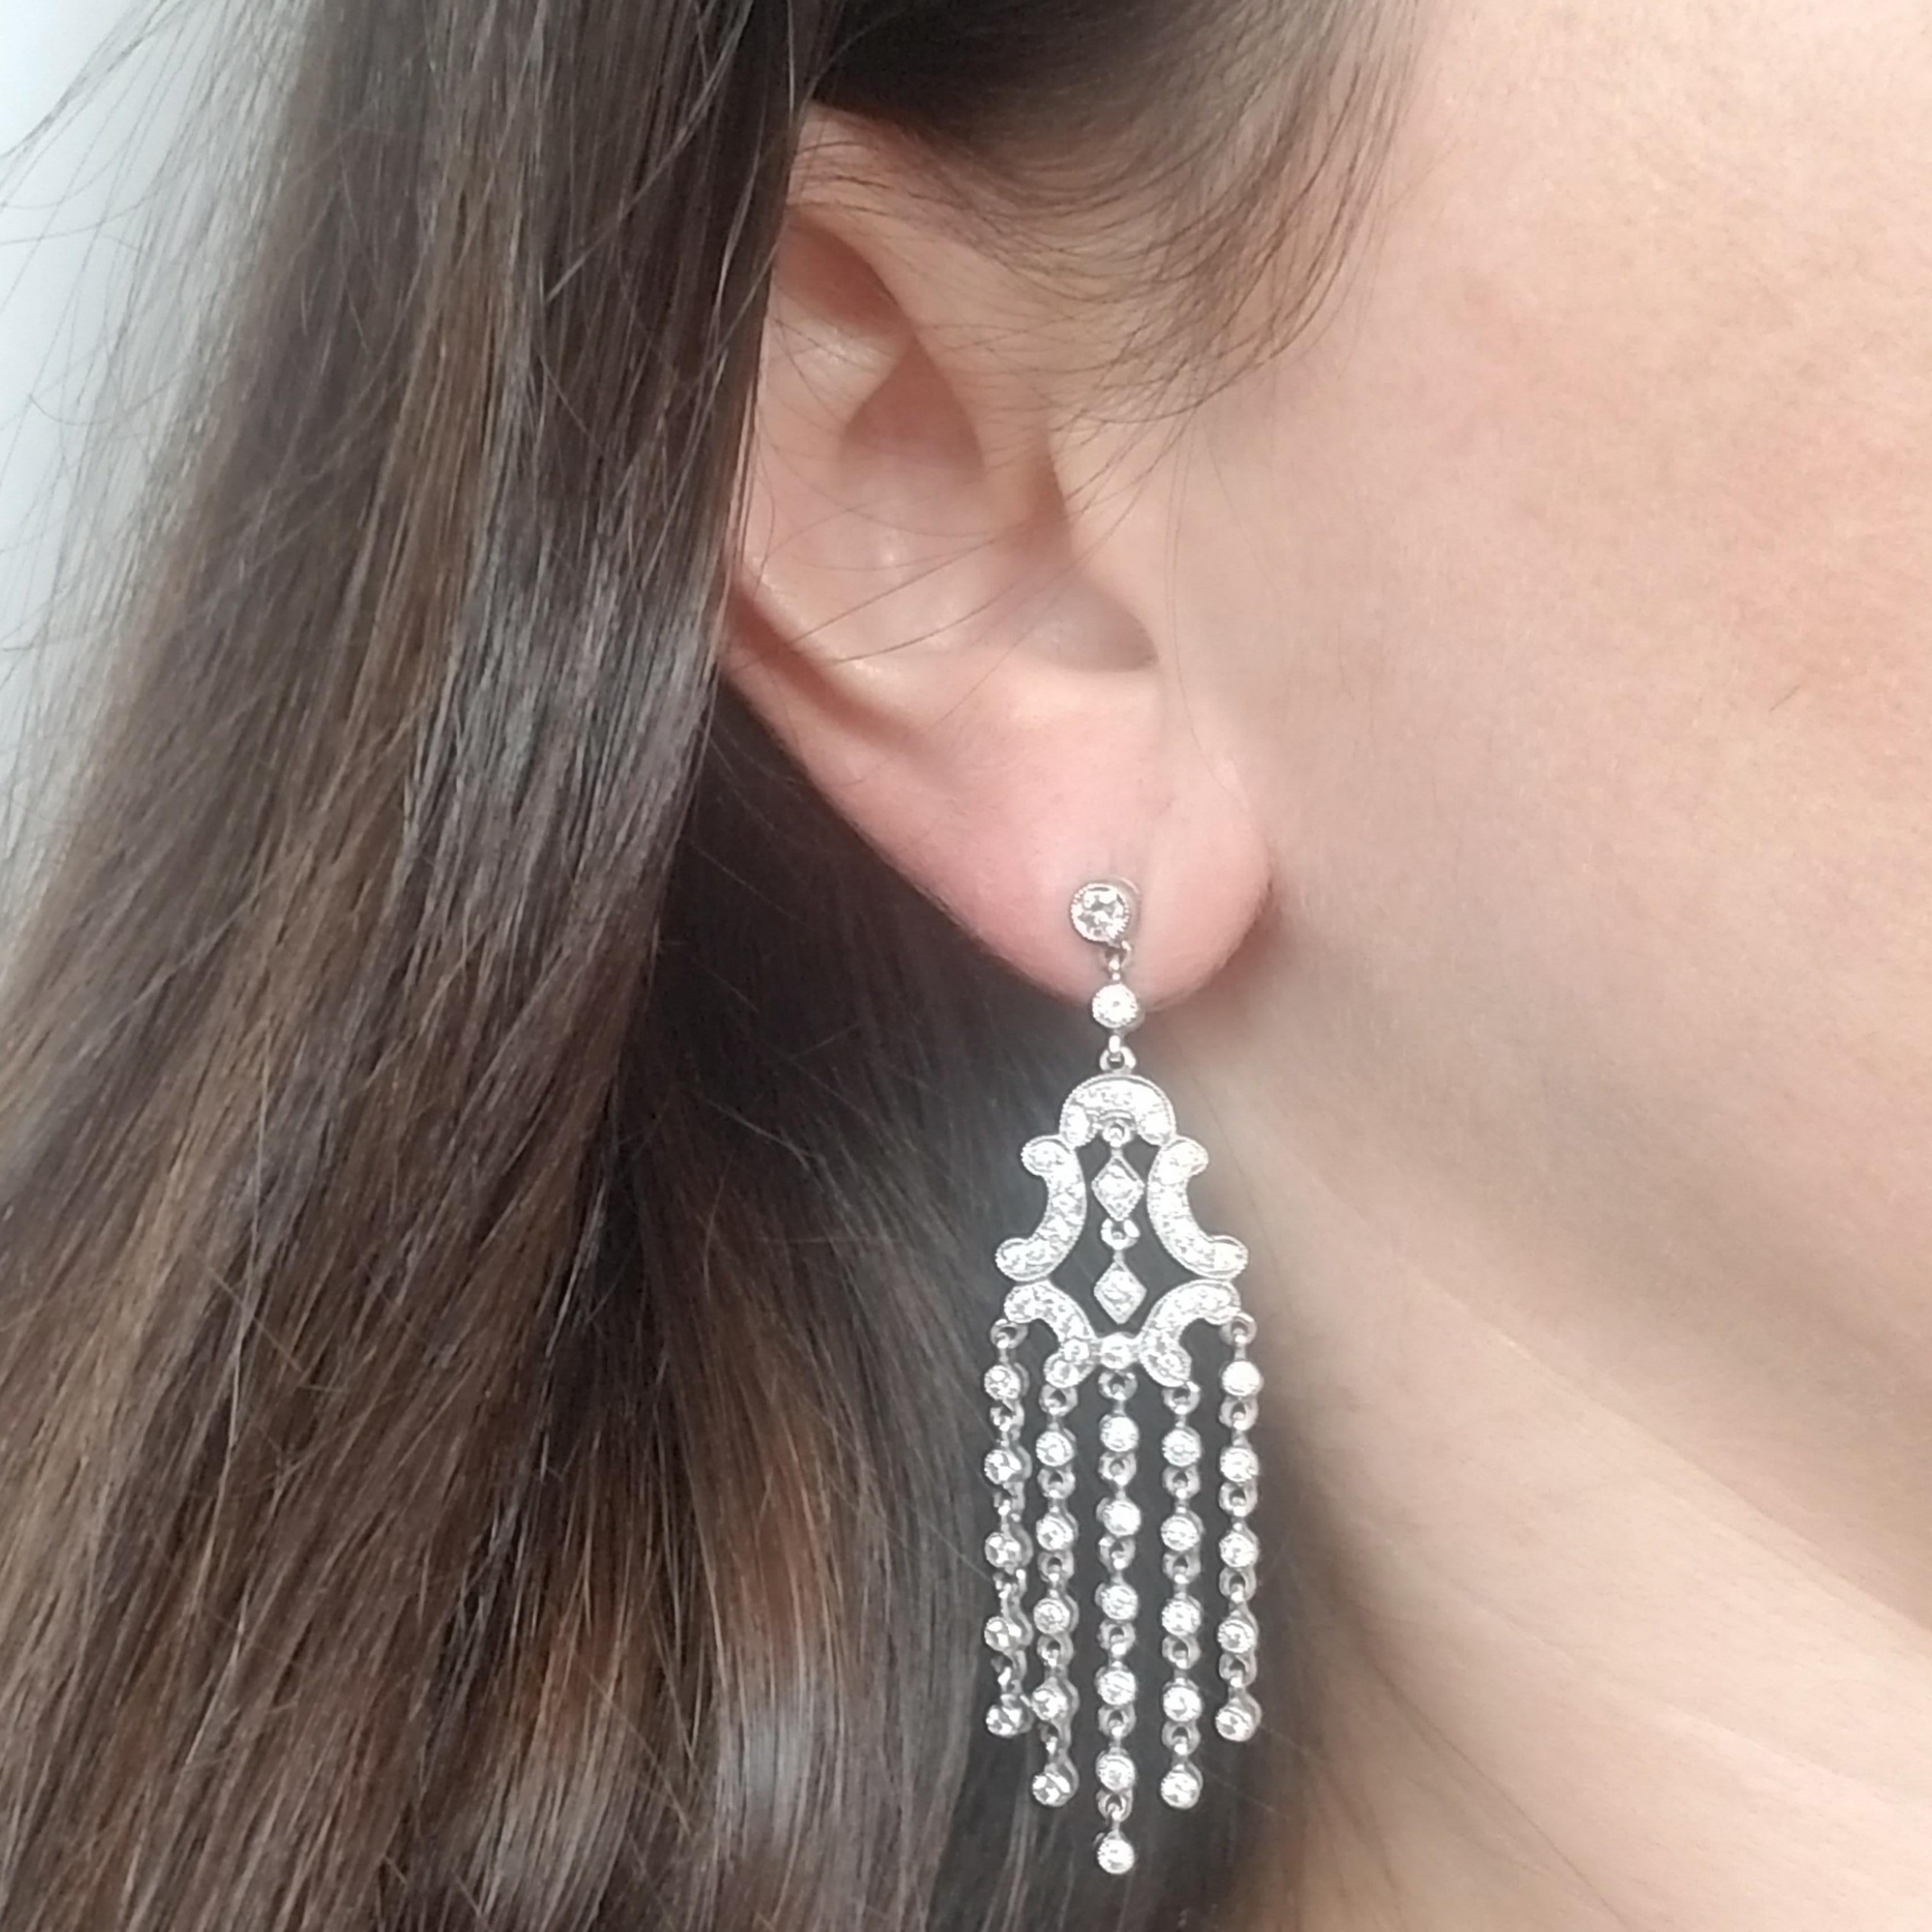 Platinum and Diamond Dangle Earrings Featuring 190 Prong & Bezel Set Round Brilliant Cut Diamonds Totaling 2.35 Carats. Diamonds are SI Clarity & G Color. Friction Post with Large Friction Backs.